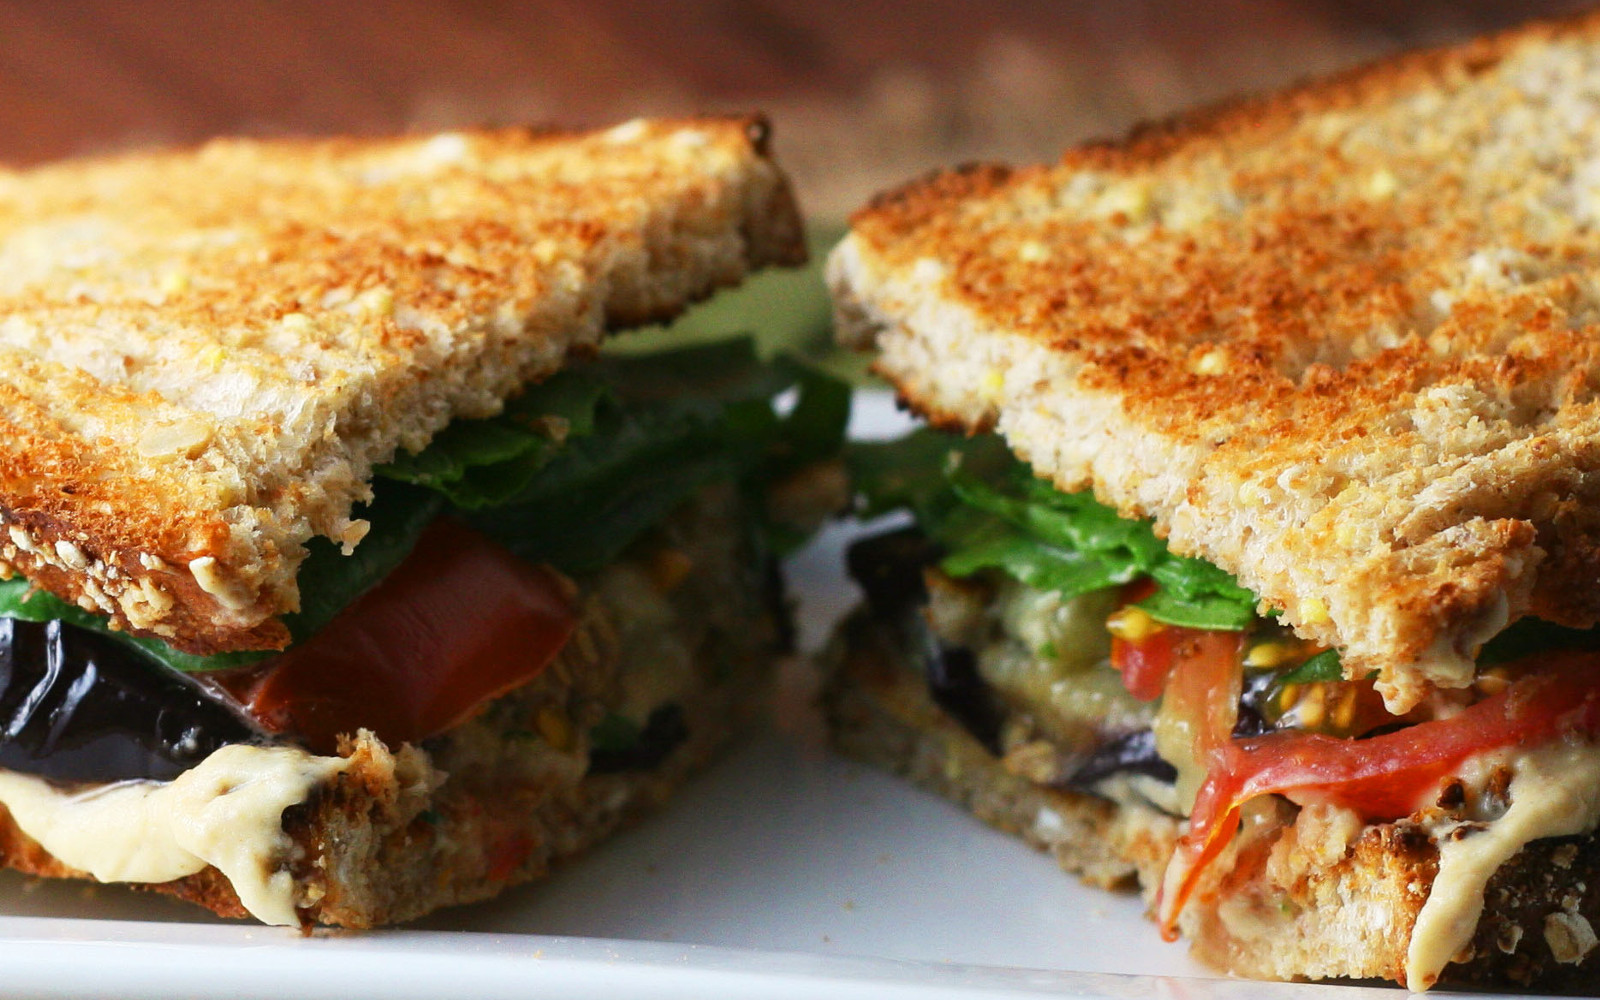 Sandwich with roasted eggplant and marinated tomatoes